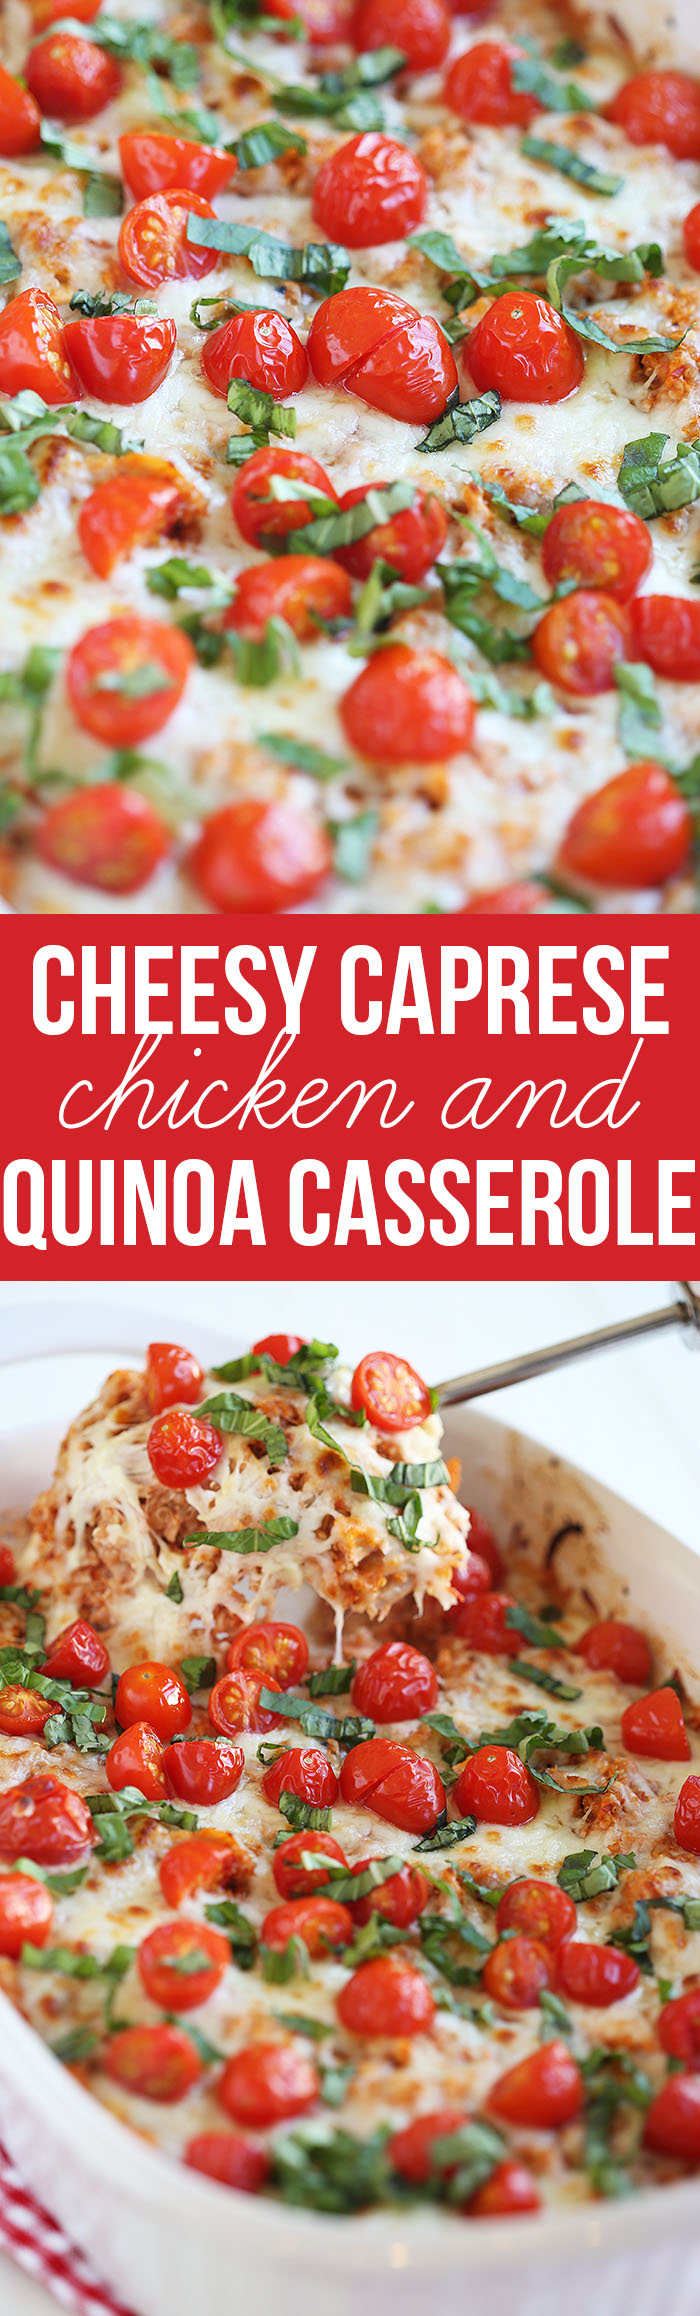 This Cheesy Caprese Chicken and Quinoa Casserole is the perfect healthy weeknight meal that is hearty, full of flavor and sure to please your entire family!